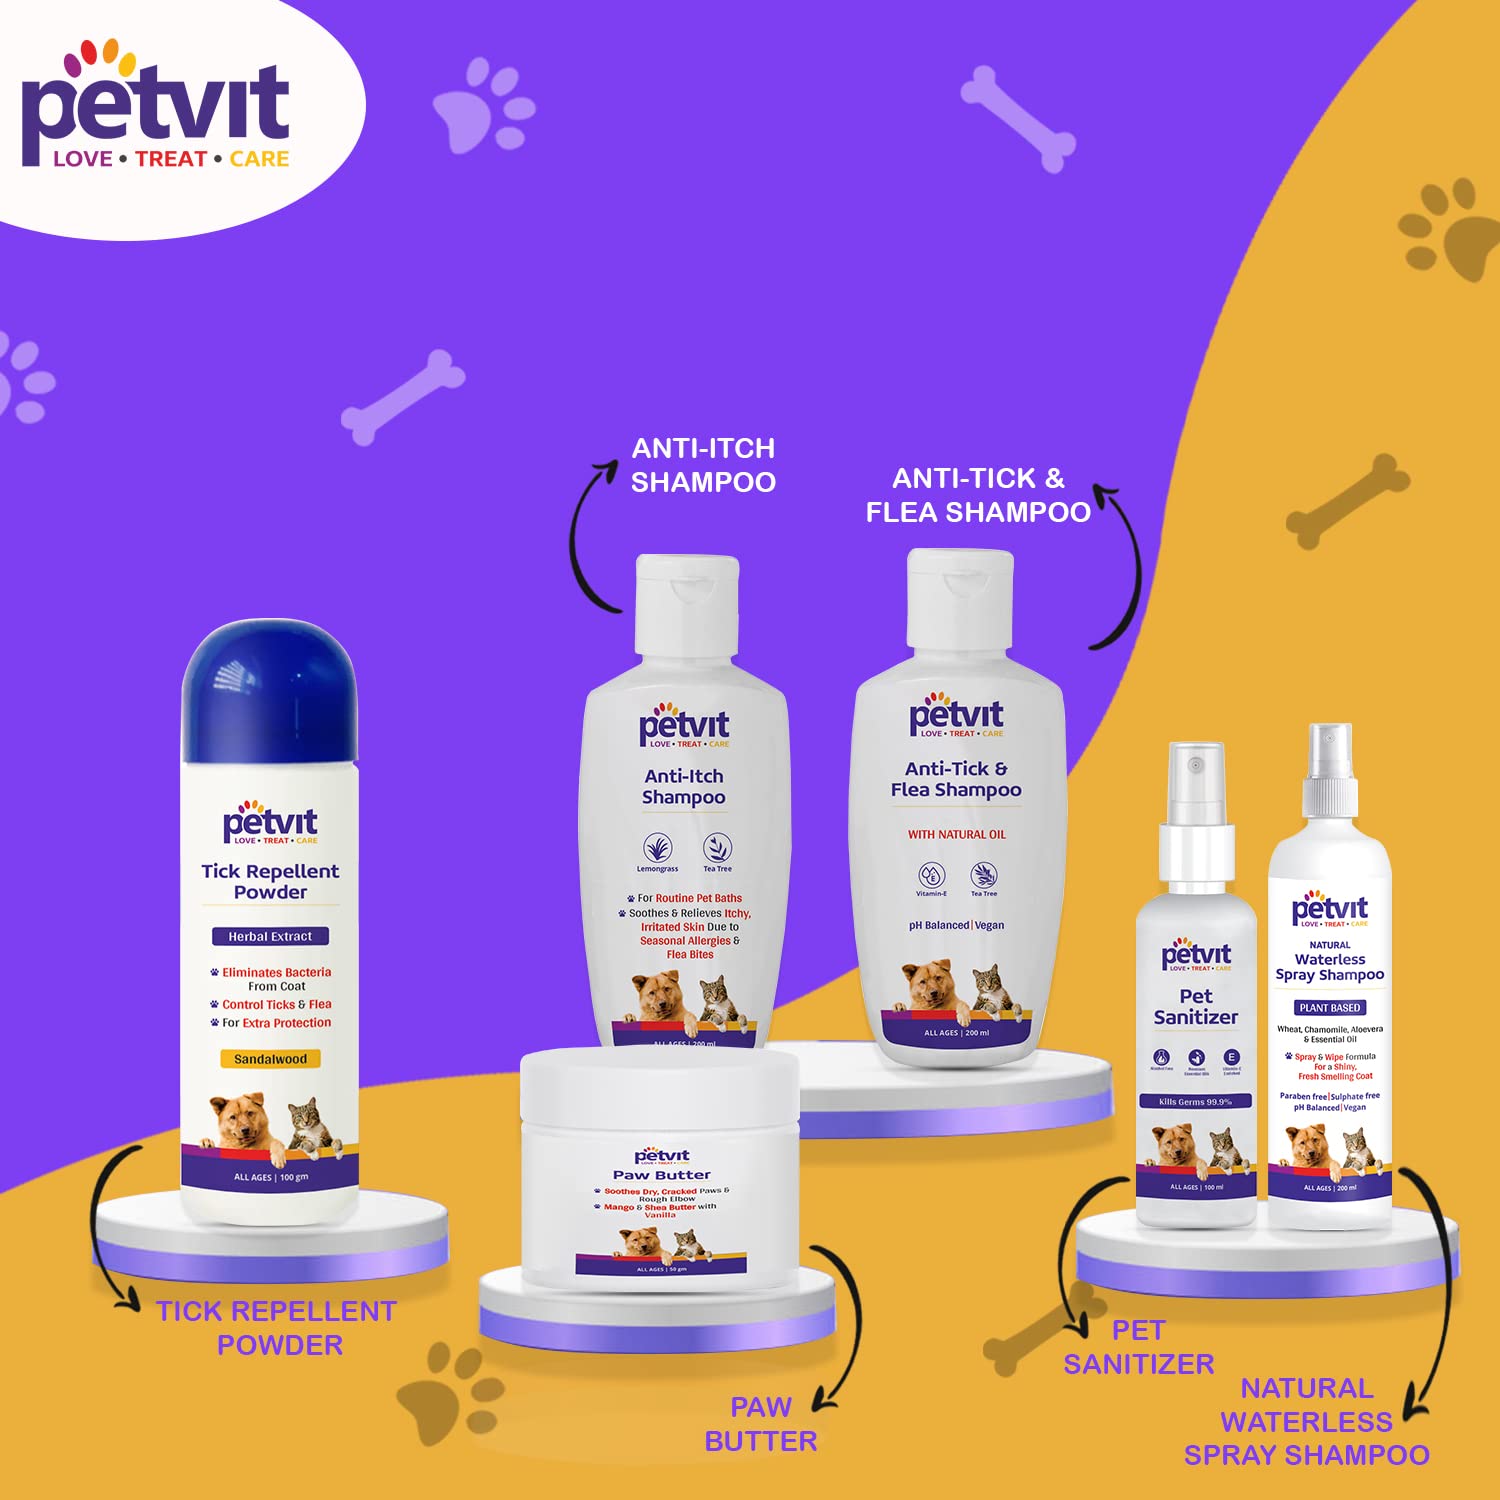 Petvit Beagle 6 in 1 Combo Grooming from Head to Tail for Your Dog|Natural Waterless Shampoo + Anti-Itch Shampoo + Paw Butter + Anti-Tick & flea Shampoo + Pet Sanitizer + Tick Repellent Powder